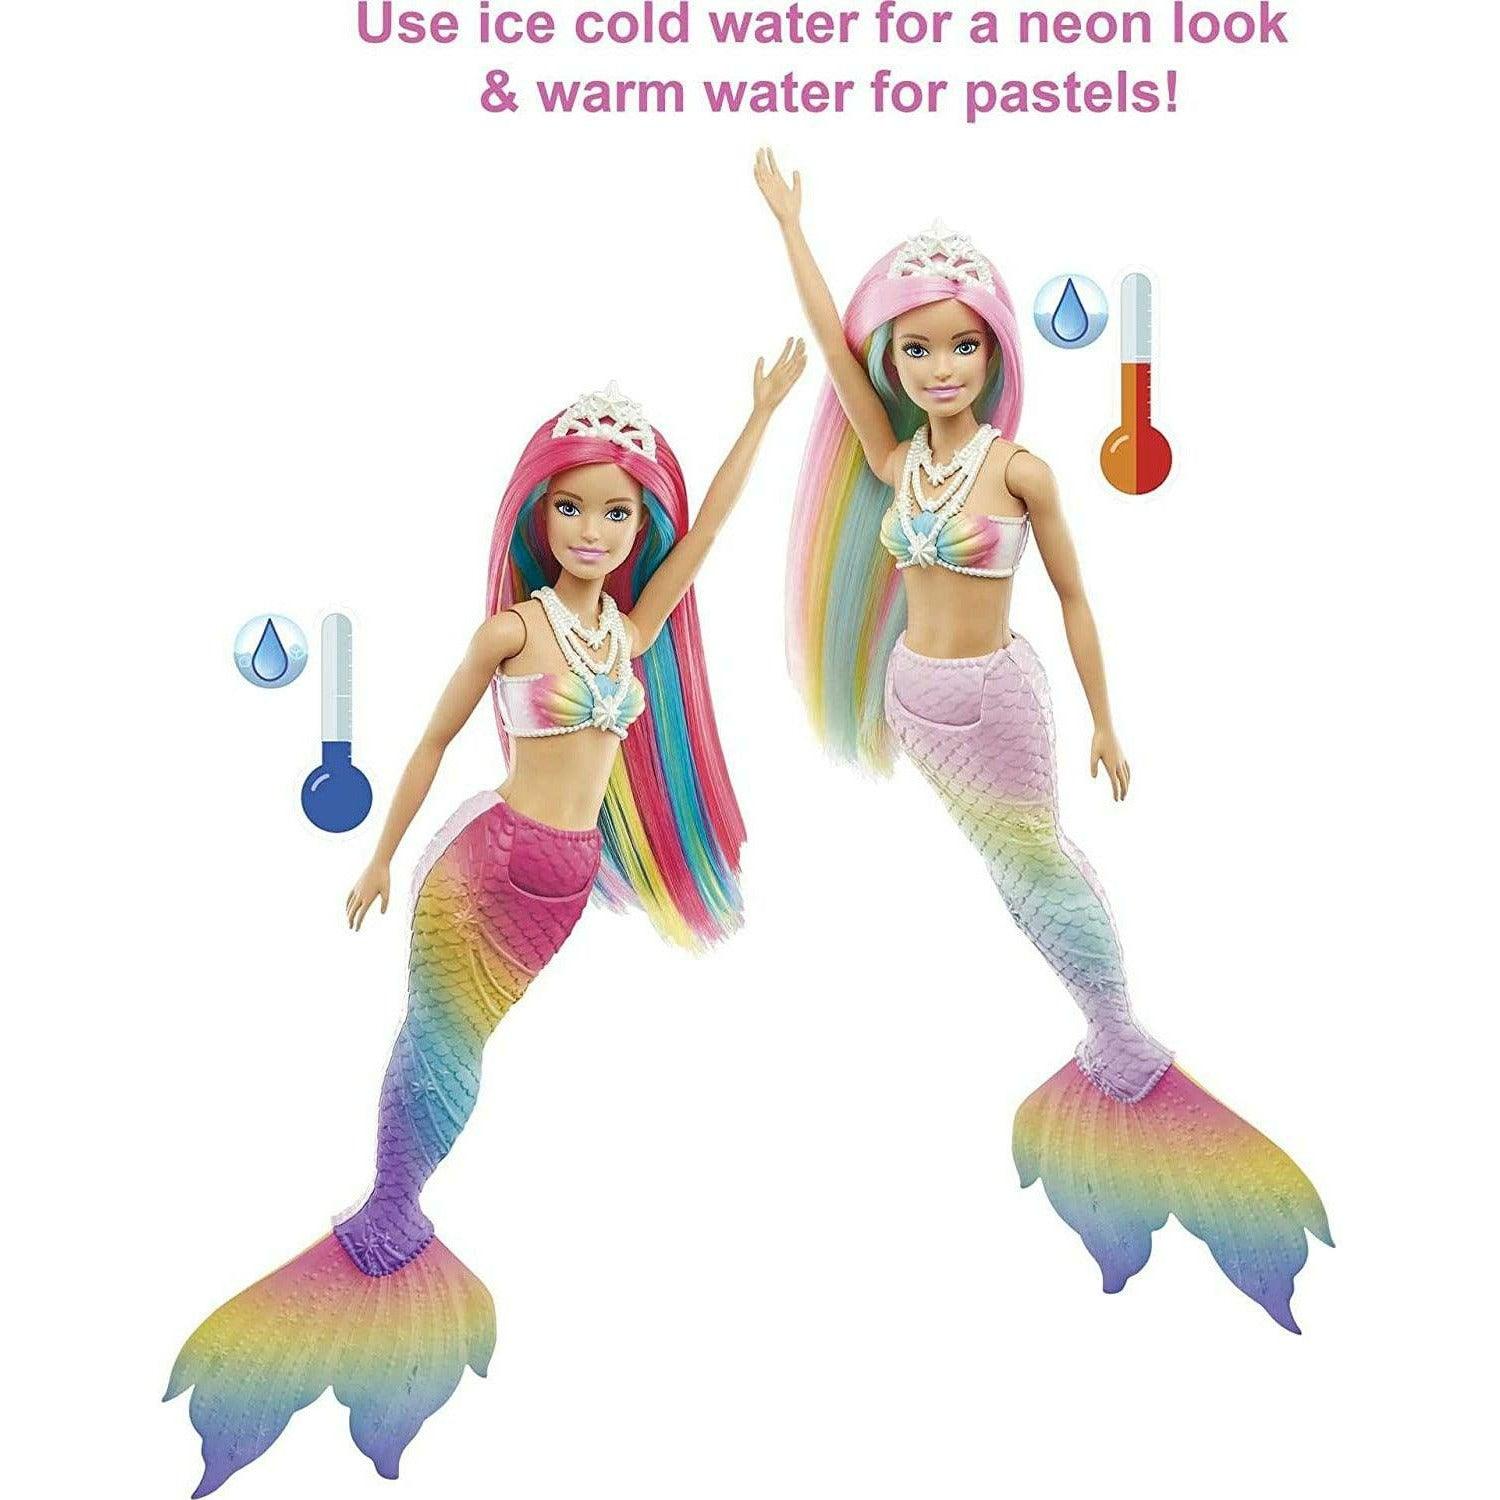 Barbie Dreamtopia Rainbow Magic Mermaid Doll with Rainbow Hair and Water-Activated Color Change Feature - Blond - BumbleToys - 5-7 Years, Barbie, Fashion Dolls & Accessories, Girls, Mermaid, Pre-Order